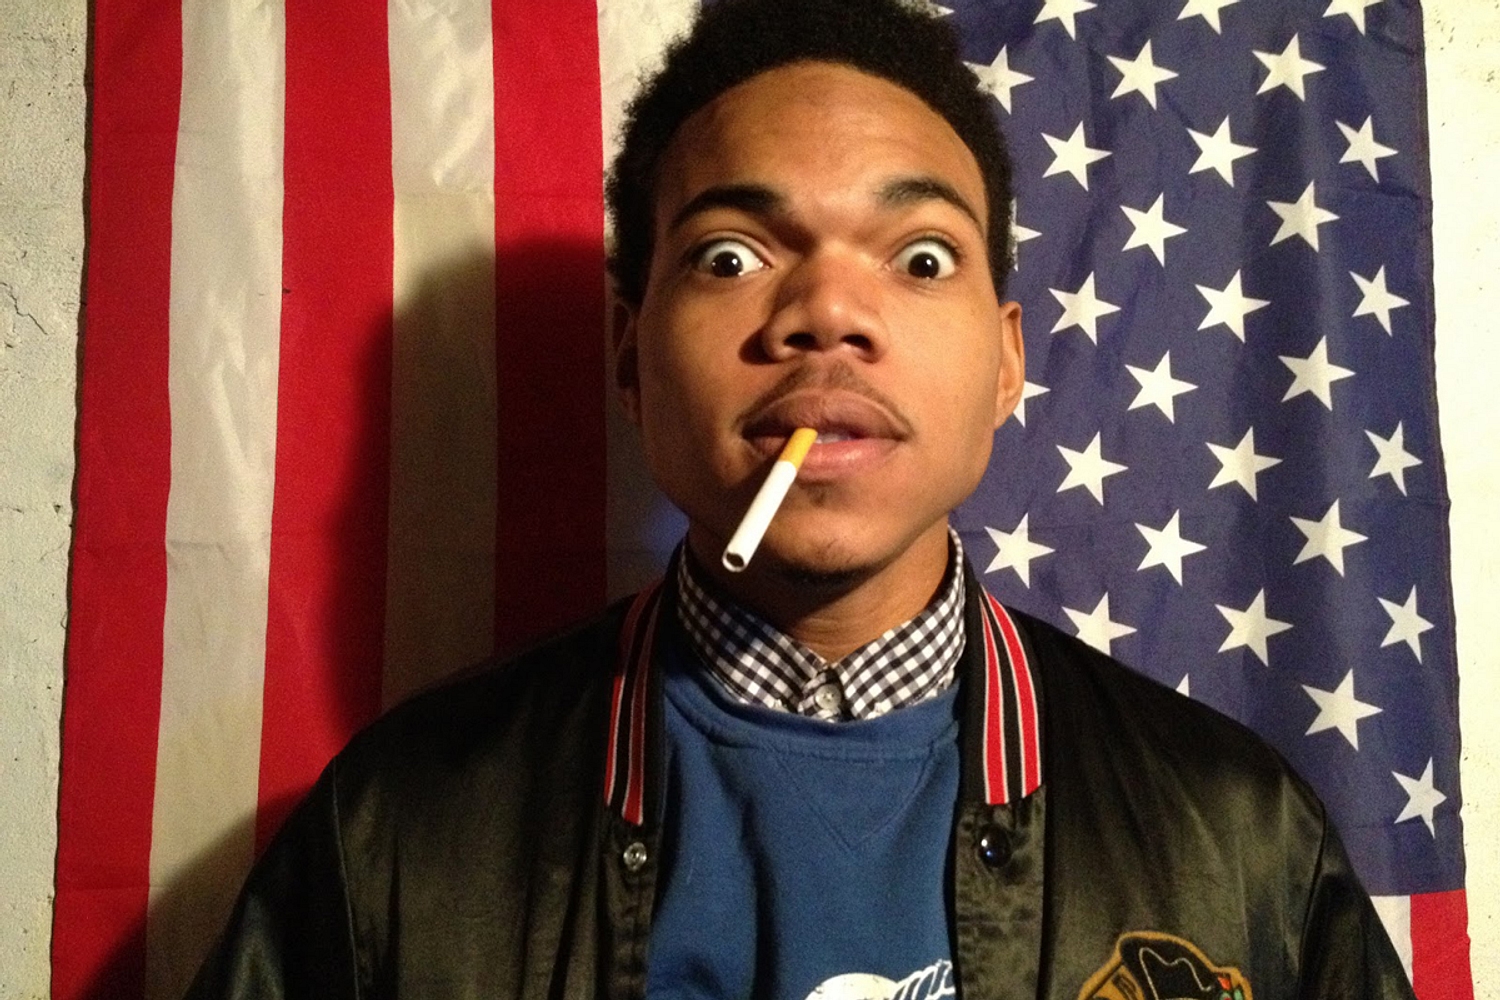 Chance the Rapper and The Social Experiment announce ‘Surf’ project